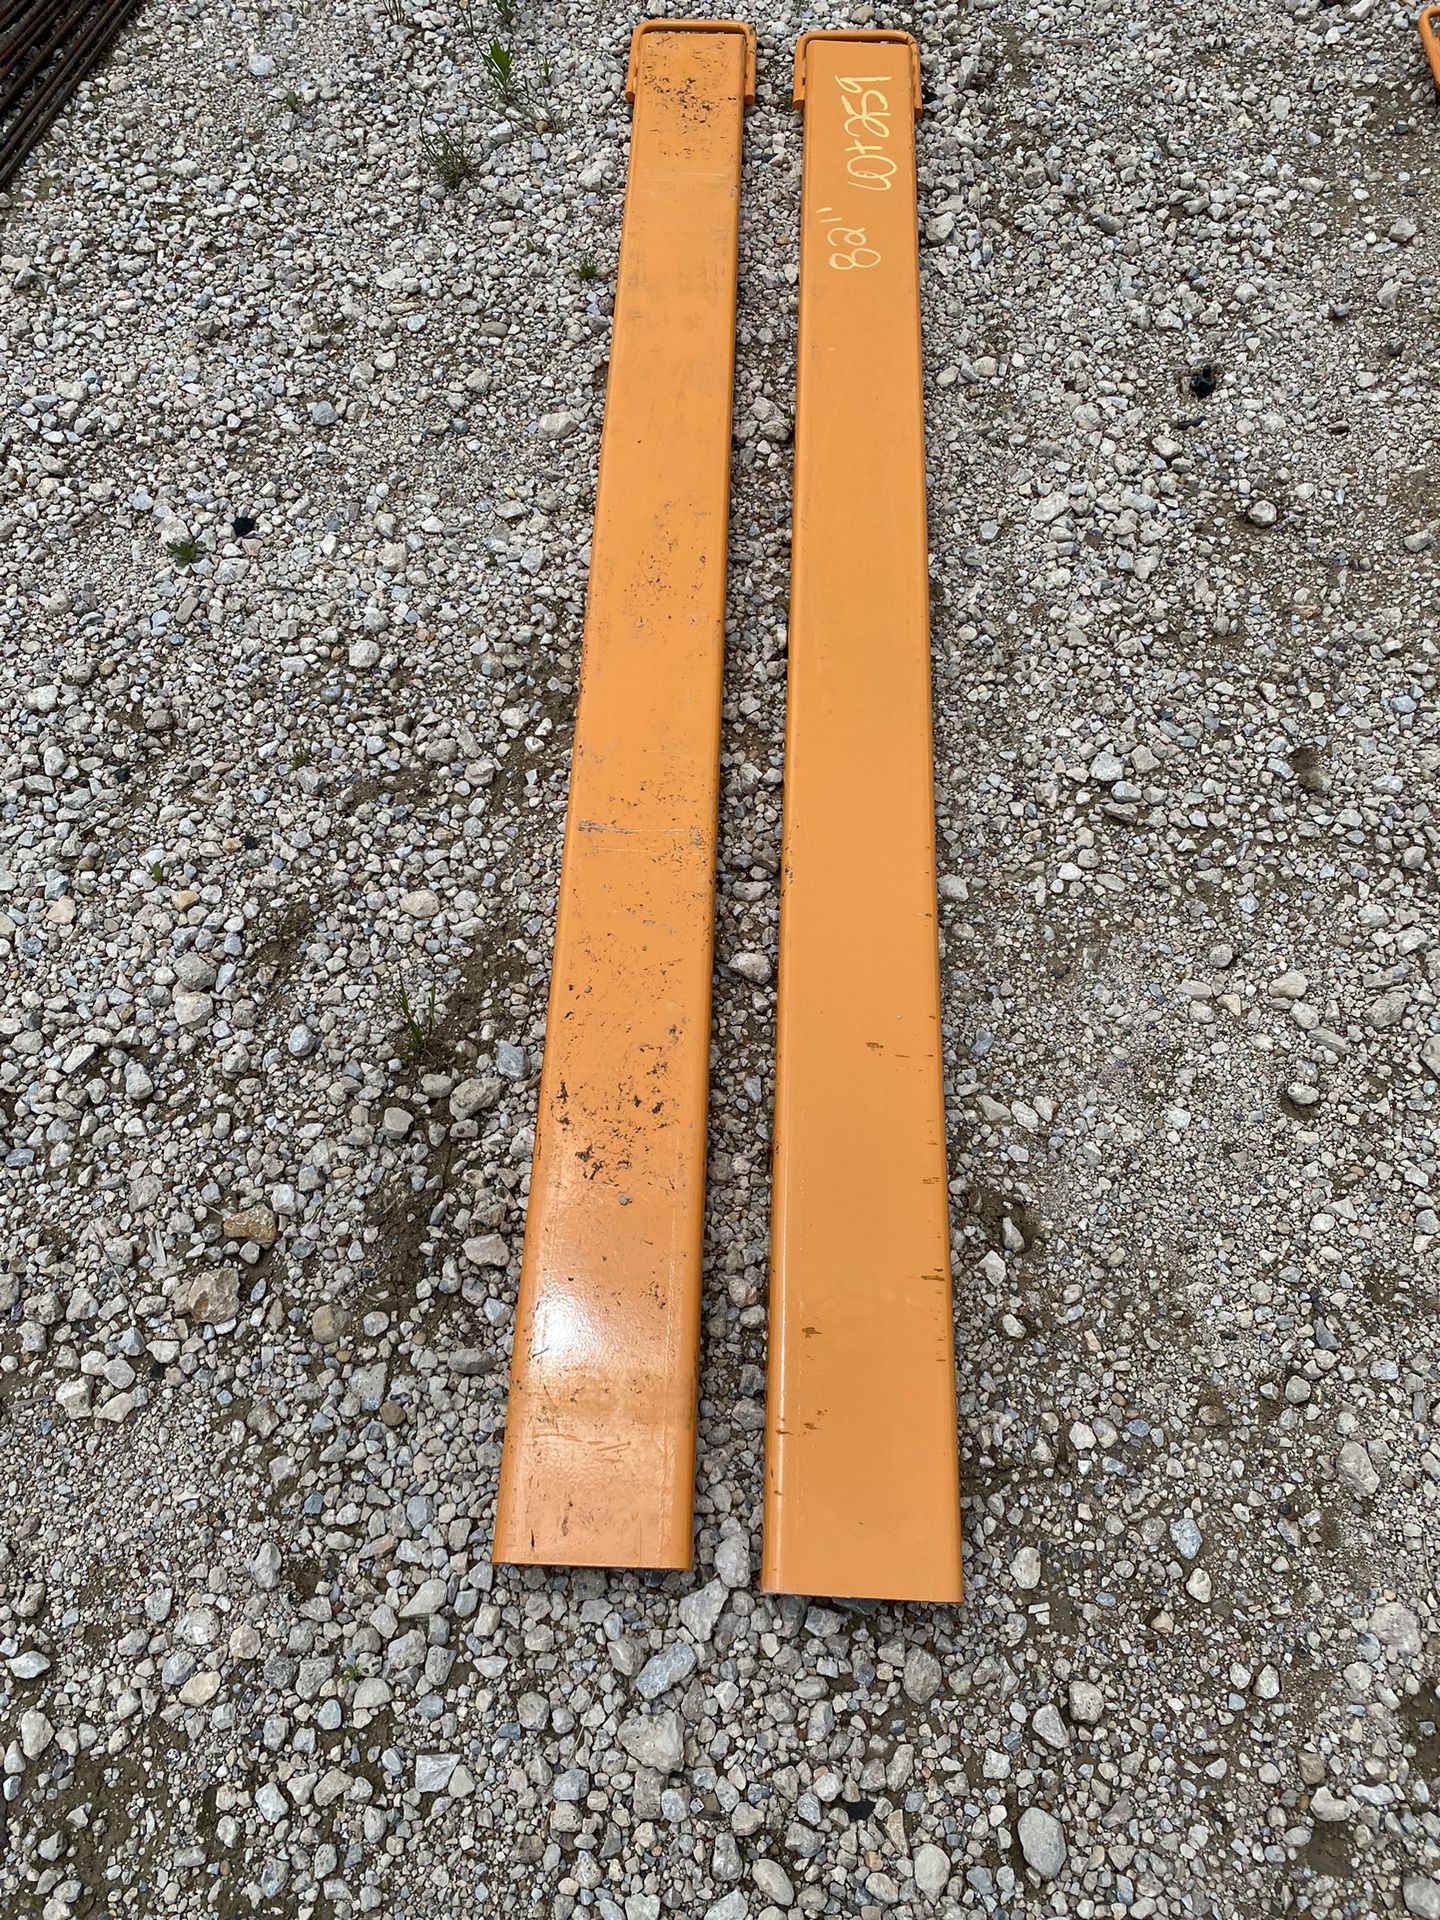 new  82”X 5” wide pallet fork extensions for Truck Skid Steer Load